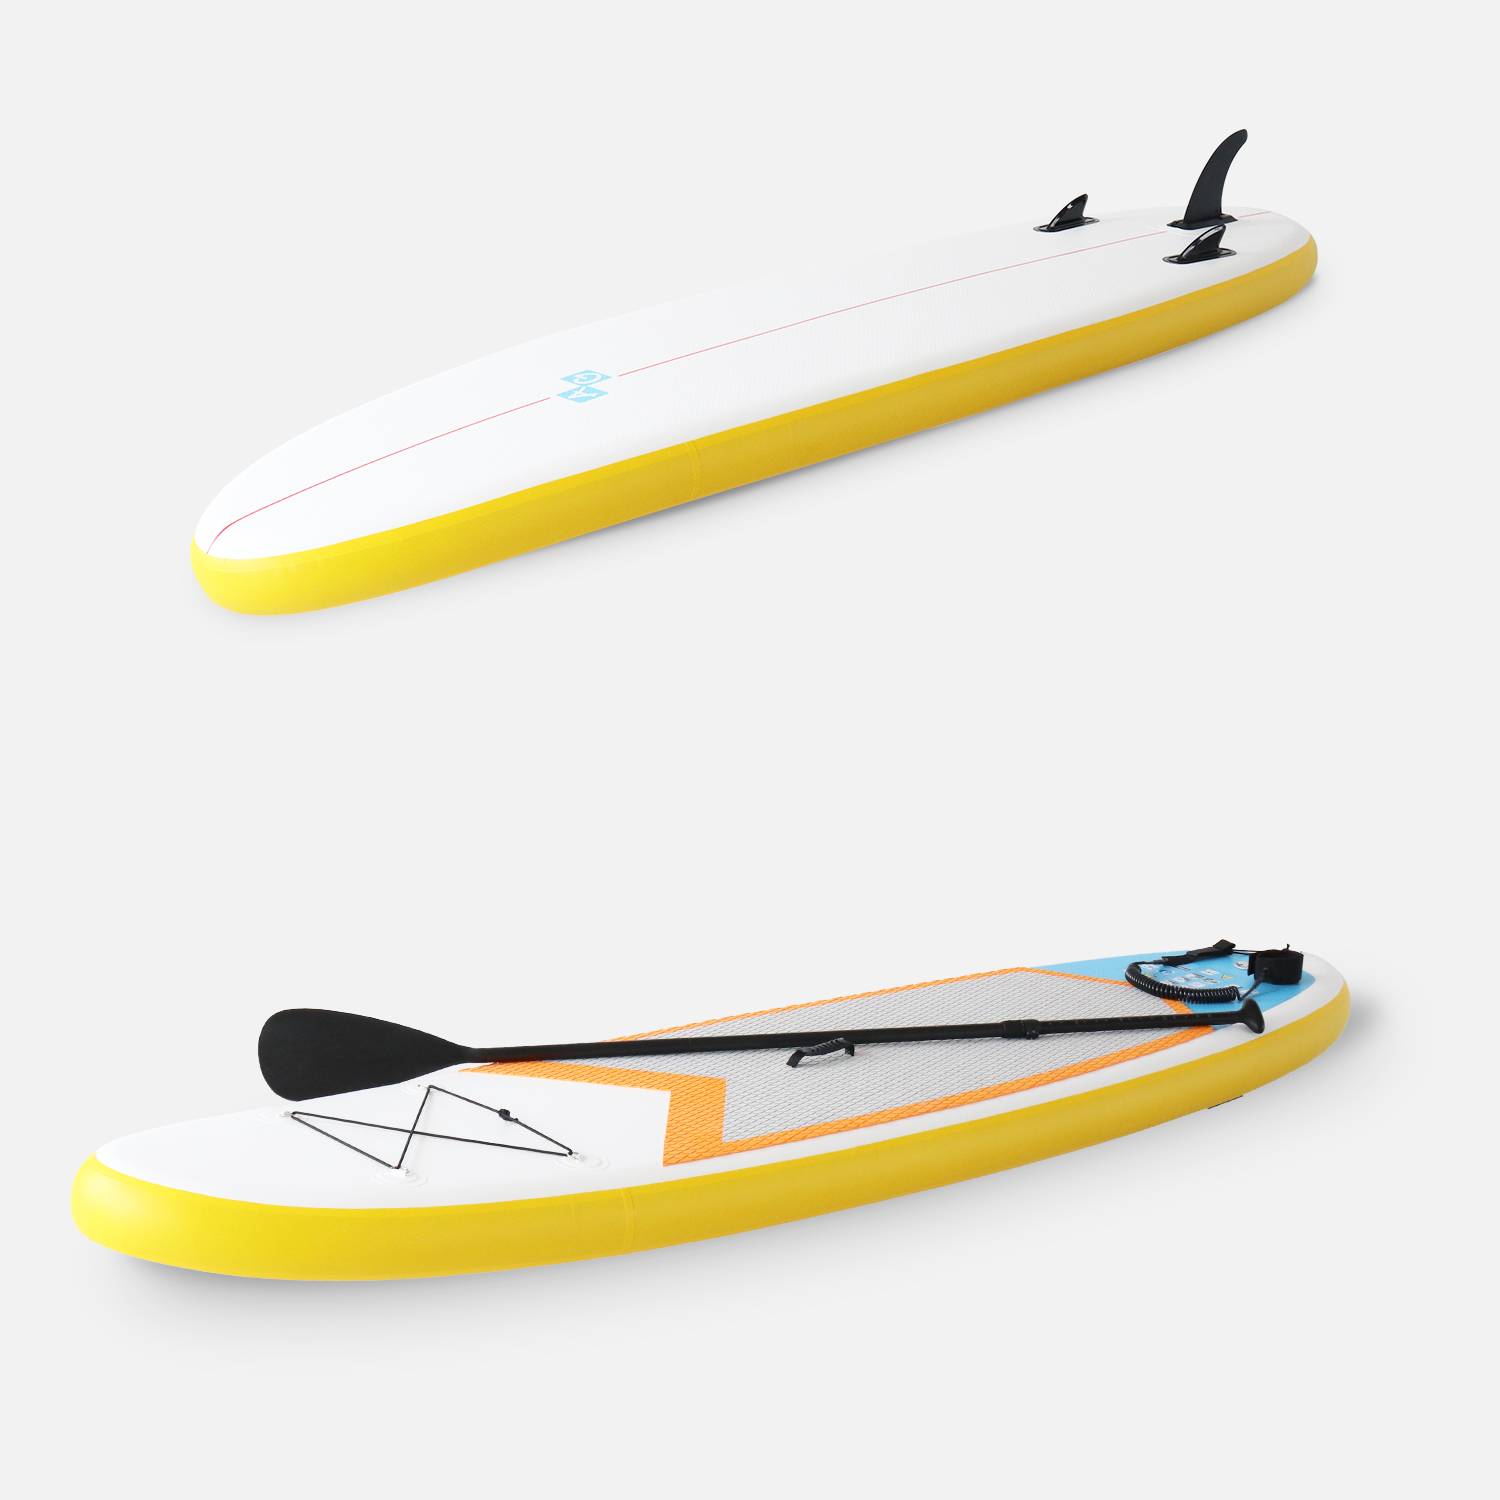 9.84FT Inflatable Stand Up Paddle Board - SUP kit with double-action high-pressure pump, paddle, leash and carry bag - Nico - Yellow Photo2